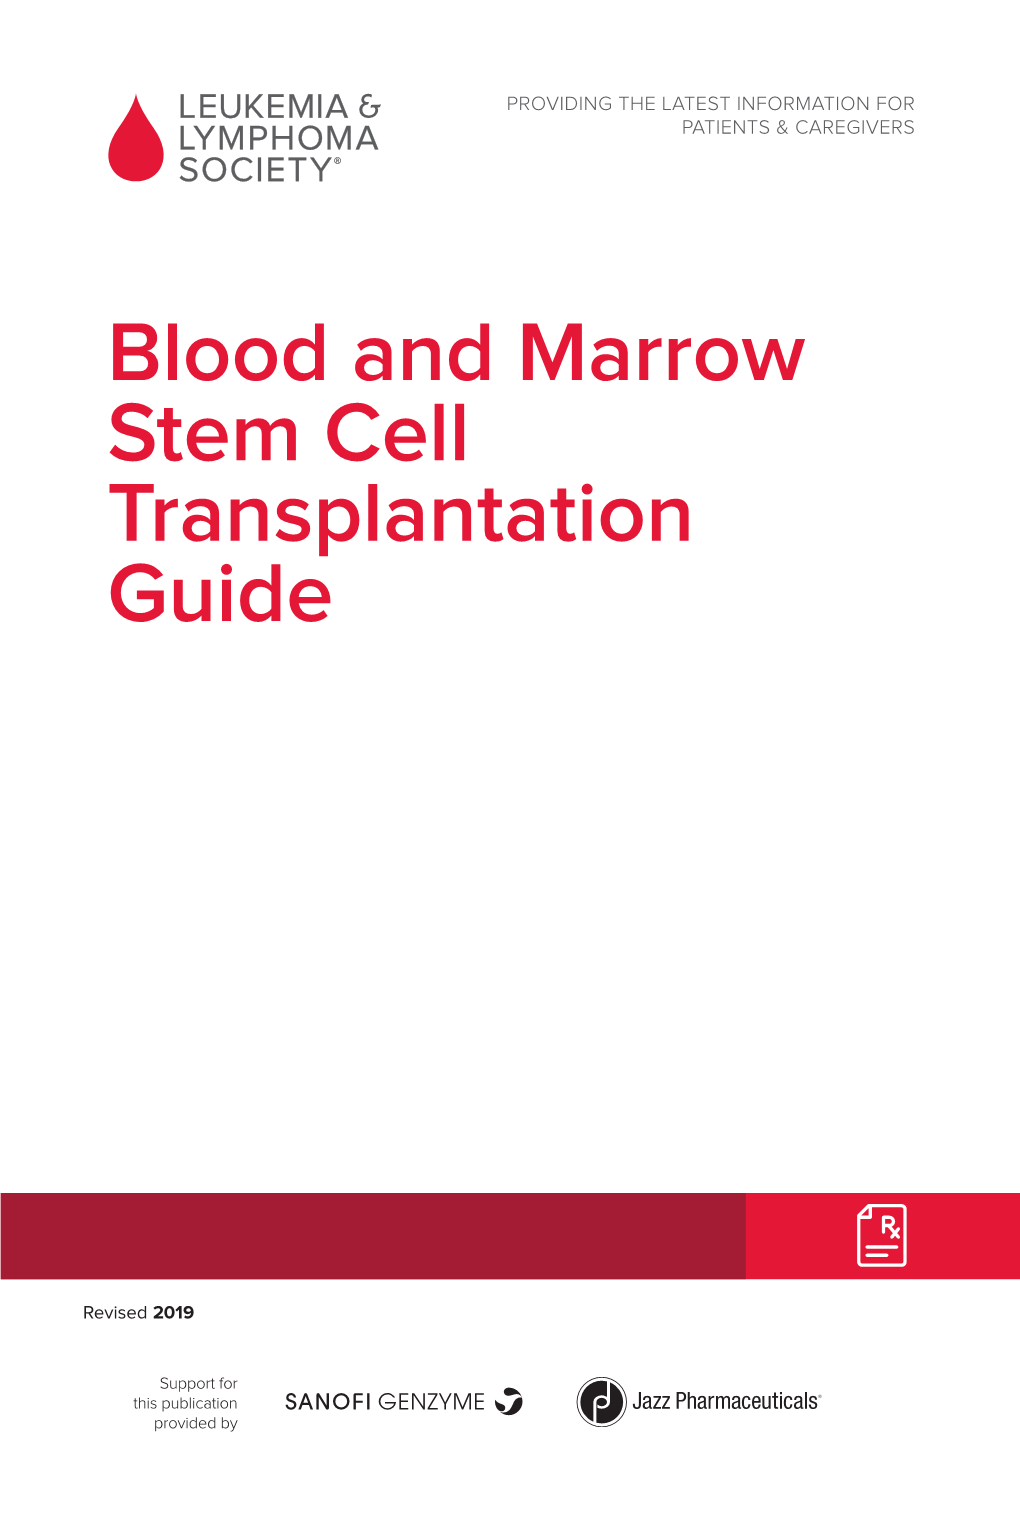 Blood and Marrow Stem Cell Transplantation Guide